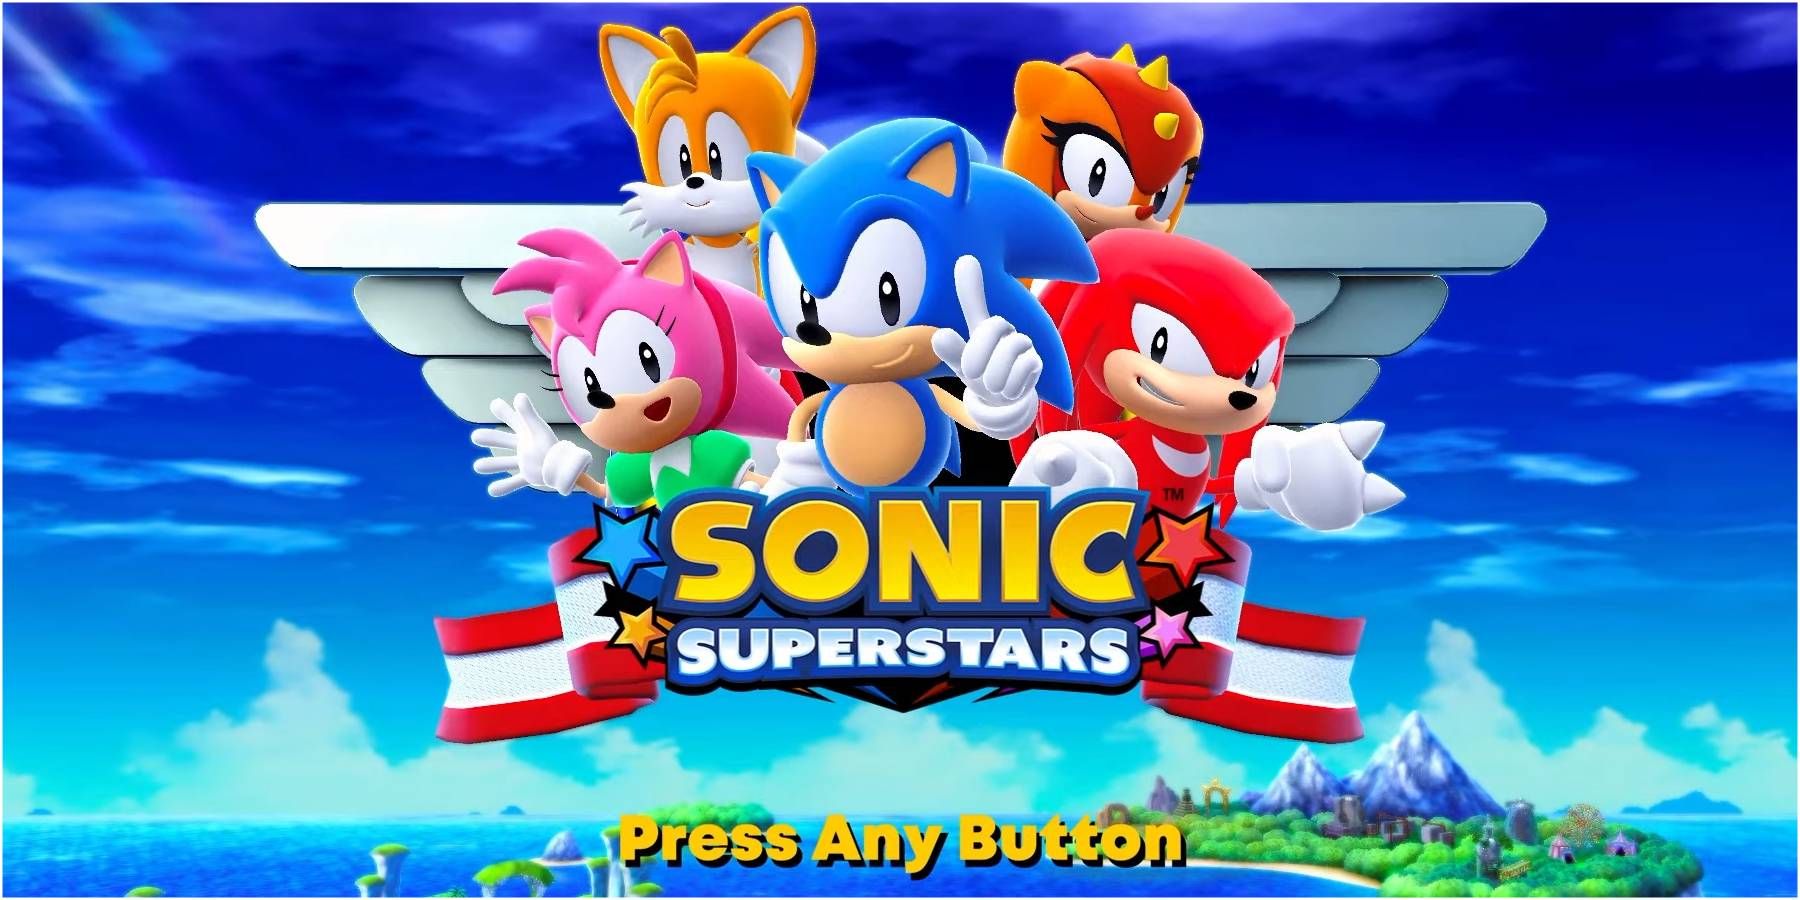 All playable Sonic Superstars characters